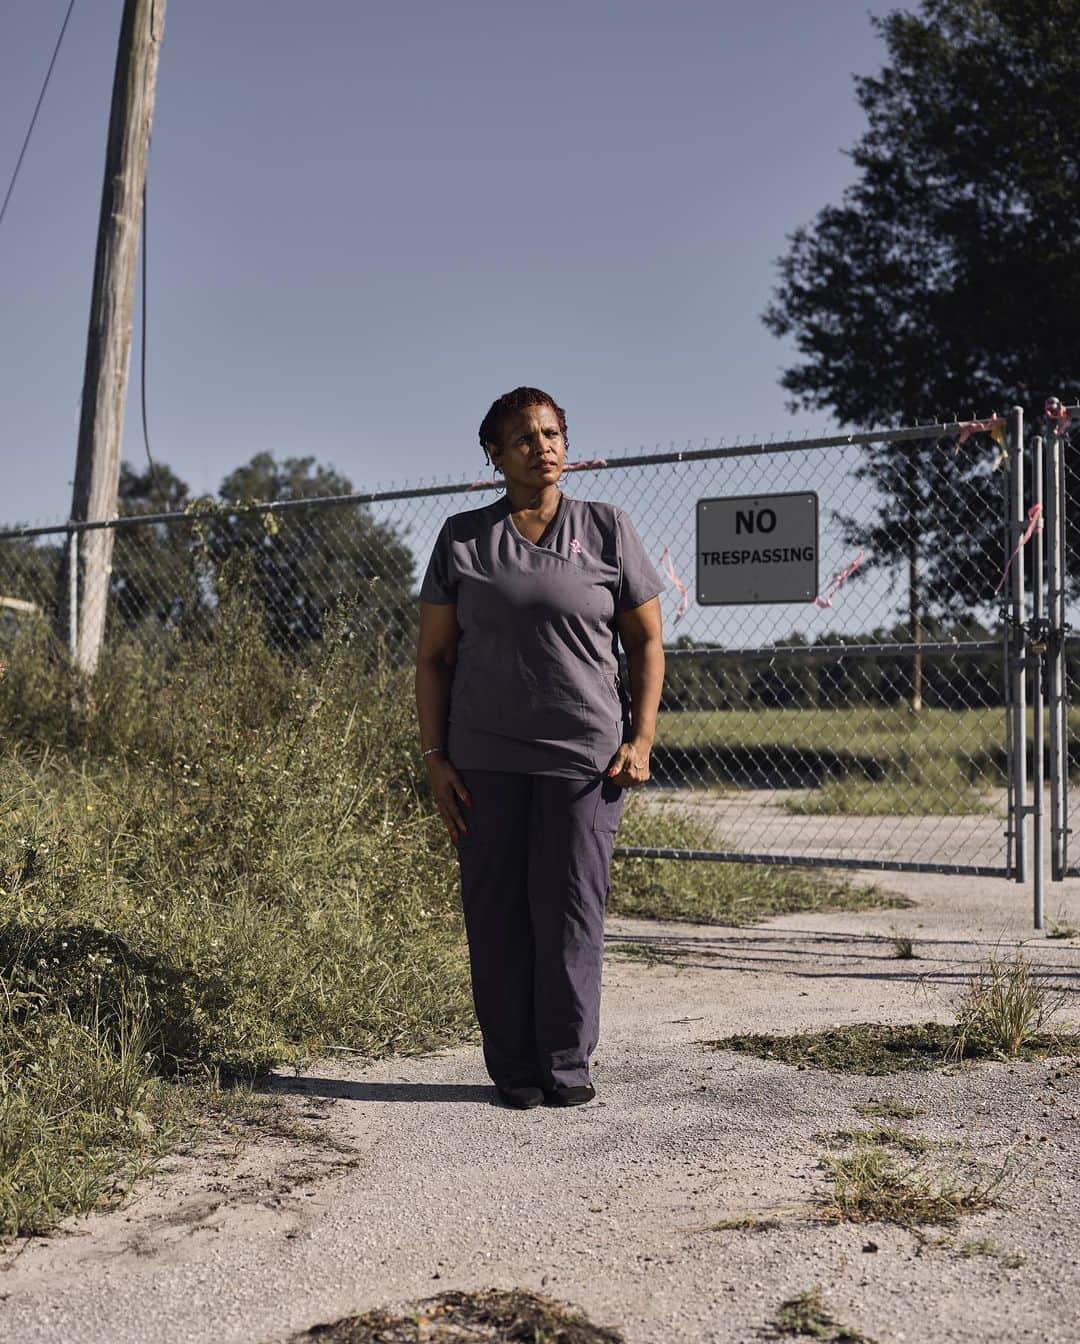 National Geographic Creativeさんのインスタグラム写真 - (National Geographic CreativeInstagram)「Photos by Christopher Gregory-Rivera @cgregoryphoto / Ocoee, Florida, is the site of the most violent incidents of voter suppression in the history of the United States. A century ago, on Election Day in 1920, two affluent Black men from Ocoee, Mose Norman and Julius "July" Perry, organized the Black community to vote and were brutally attacked by the Ku Klux Klan and local law enforcement. This incident led to the deaths of Perry and anywhere from three to 50 members of the Black community, as well as two Klansmen. After the massacre, the Black community was ousted from the town and their lands were confiscated. For the next 65 years Ocoee became a sundown town, where Black people were banned after sunset by threat of violence.  (1) George Oliver, the first Black commissioner of Ocoee. (2) Narisse Spicer's great-grandparents fled Ocoee during the massacre and resettled in Apopka, Florida. “We are 100 years later into this, and we are still dealing with voter intimidation and voter suppression and issues of race and violence. It is definitely time, and well overdue, to start thinking about how we can change the future so that future generations don’t experience the same thing,” she said. (3) Pam Grady stands in front of July Perry’s former land. “We are not mourning the death of July Perry; we are celebrating his bravery,” she told me. “These people paved the way for us to have the right to vote.” (4) J. Carl Devine's grandparents fled Ocoee after the massacre. “When one group is trying to suppress another group from voting, that’s when the whole Constitution is then in jeopardy. When one person is denied, all of us are denied.” (5) Jacqueline Perry Blalock (left) and Sha’ron McWhite are both descendants of July Perry. “Our ancestors laid the foundation of the importance of [expressing] our right to vote, and we need to continue that on so that our future generations will have a better opportunity at an equal life. That is what I would like to see,” McWhite said. (6) The city maintains the site of the former African-American cemetery in Ocoee, but it has yet to acquire the land and create a space for reflection as members of the Black community have proposed.」11月4日 4時19分 - natgeointhefield